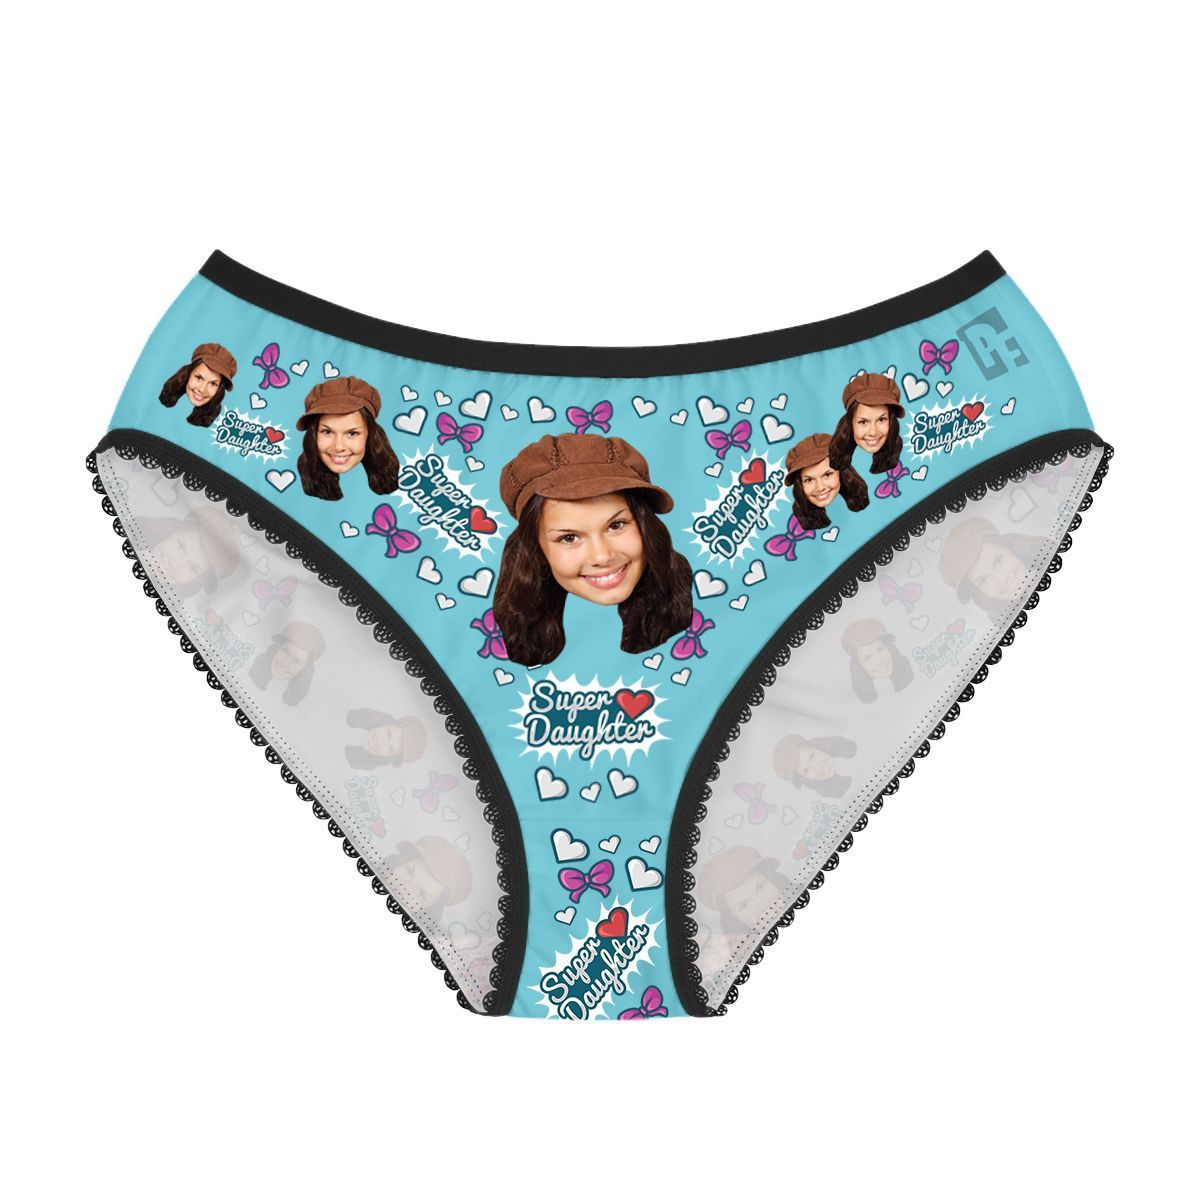 Blue Super daughter women's underwear briefs personalized with photo printed on them